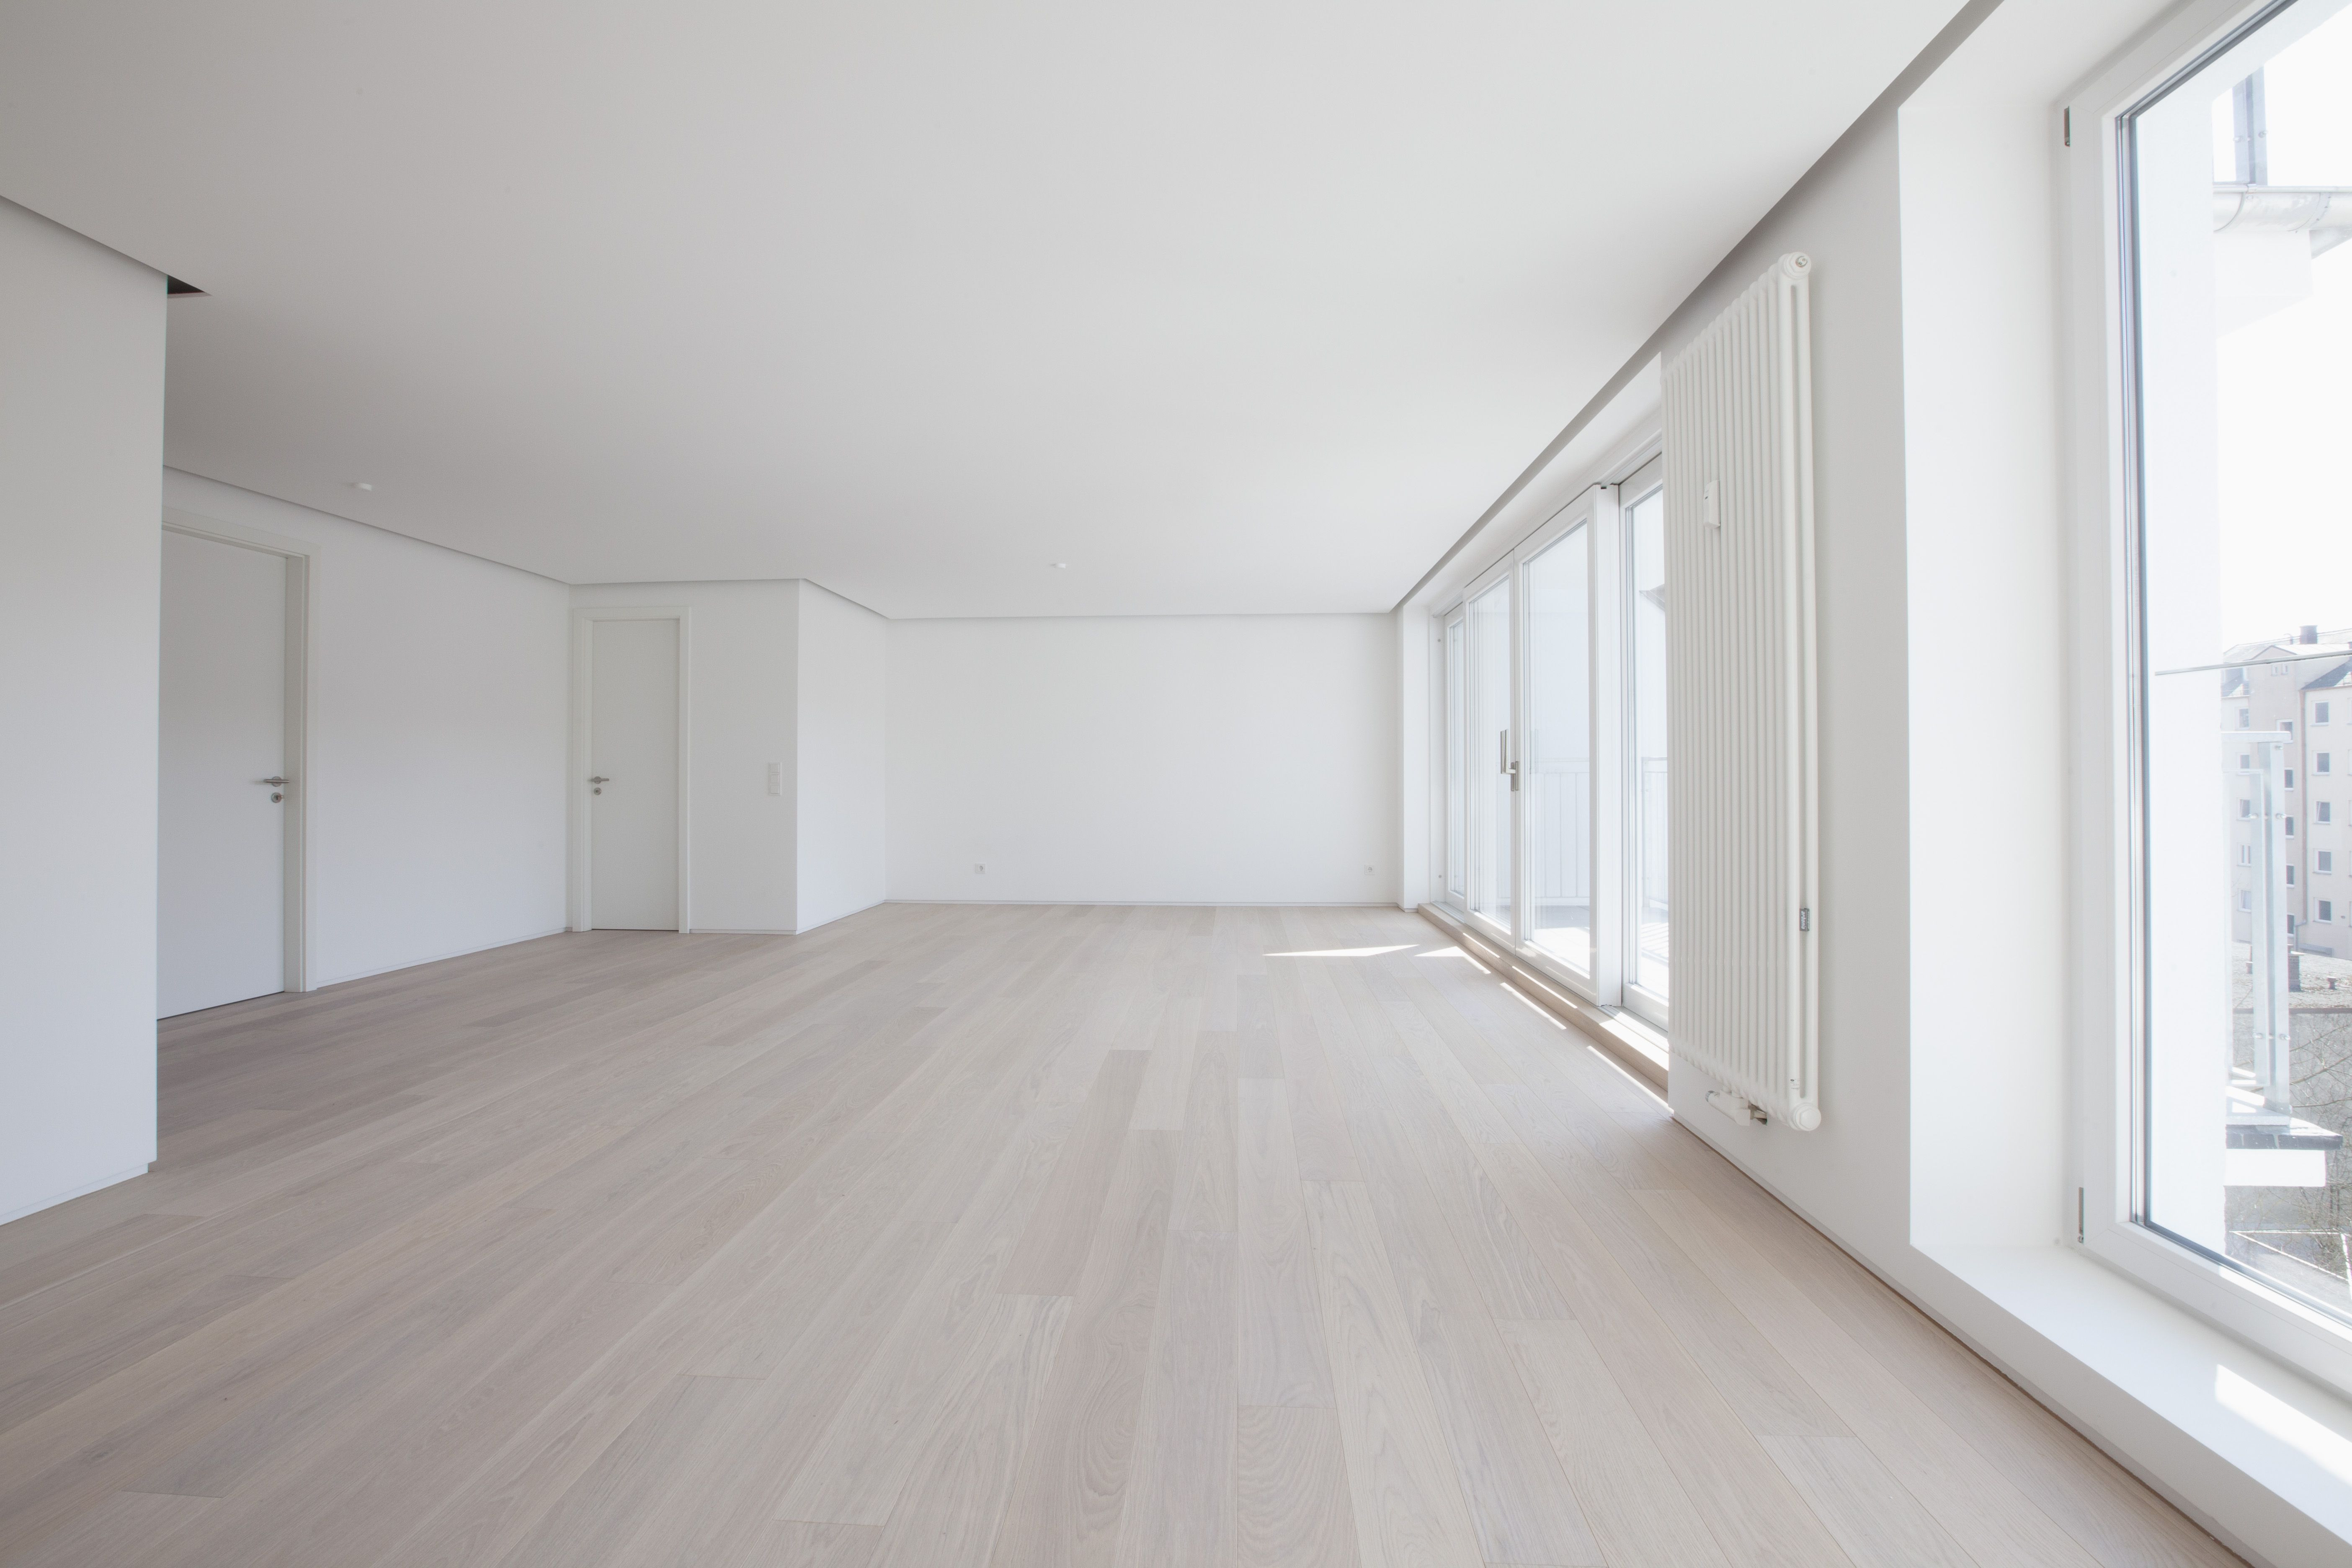 22 Stunning How to Finish An Unfinished Hardwood Floor 2024 free download how to finish an unfinished hardwood floor of basics of favorite hybrid engineered wood floors inside empty living room in modern apartment 578189139 58866f903df78c2ccdecab05